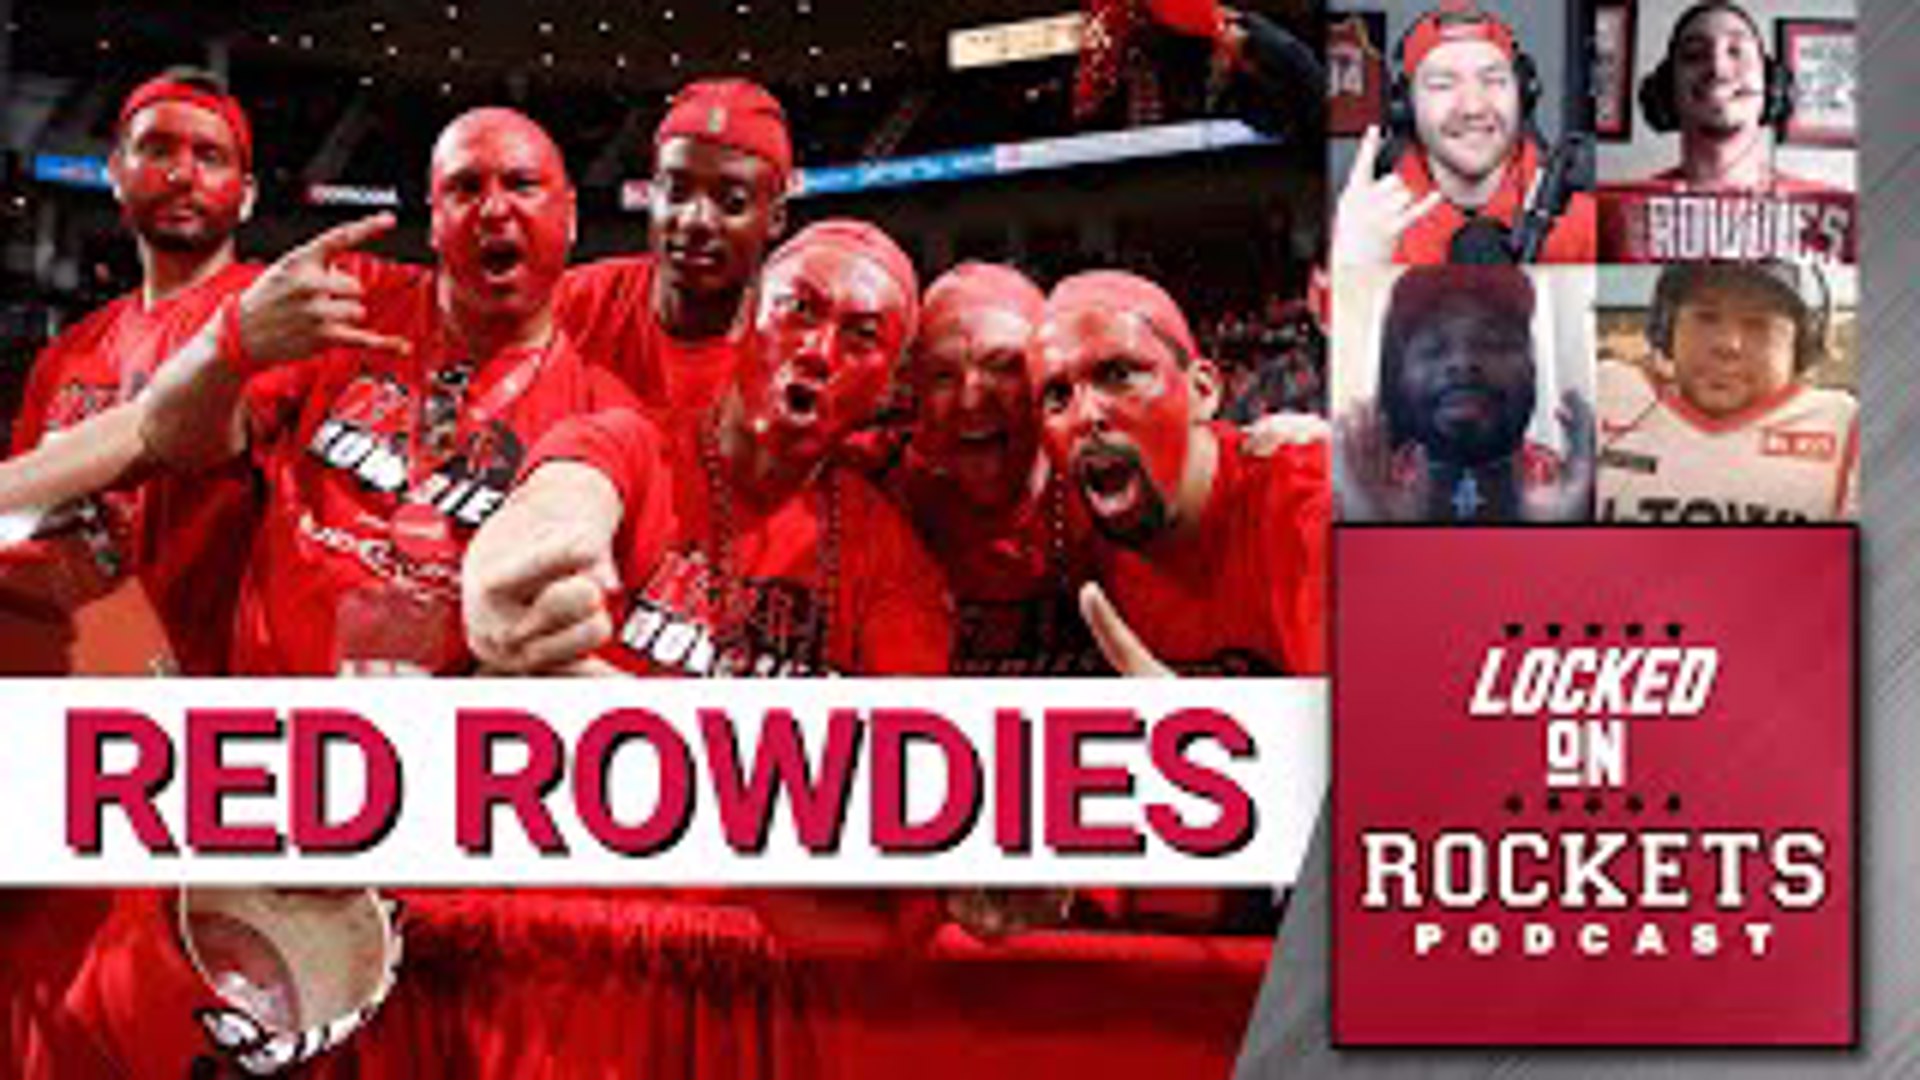 Host Jackson Gatlin is joined by three Houston Rockets Red Rowdies to discuss what it takes to be an over-the-top fan.